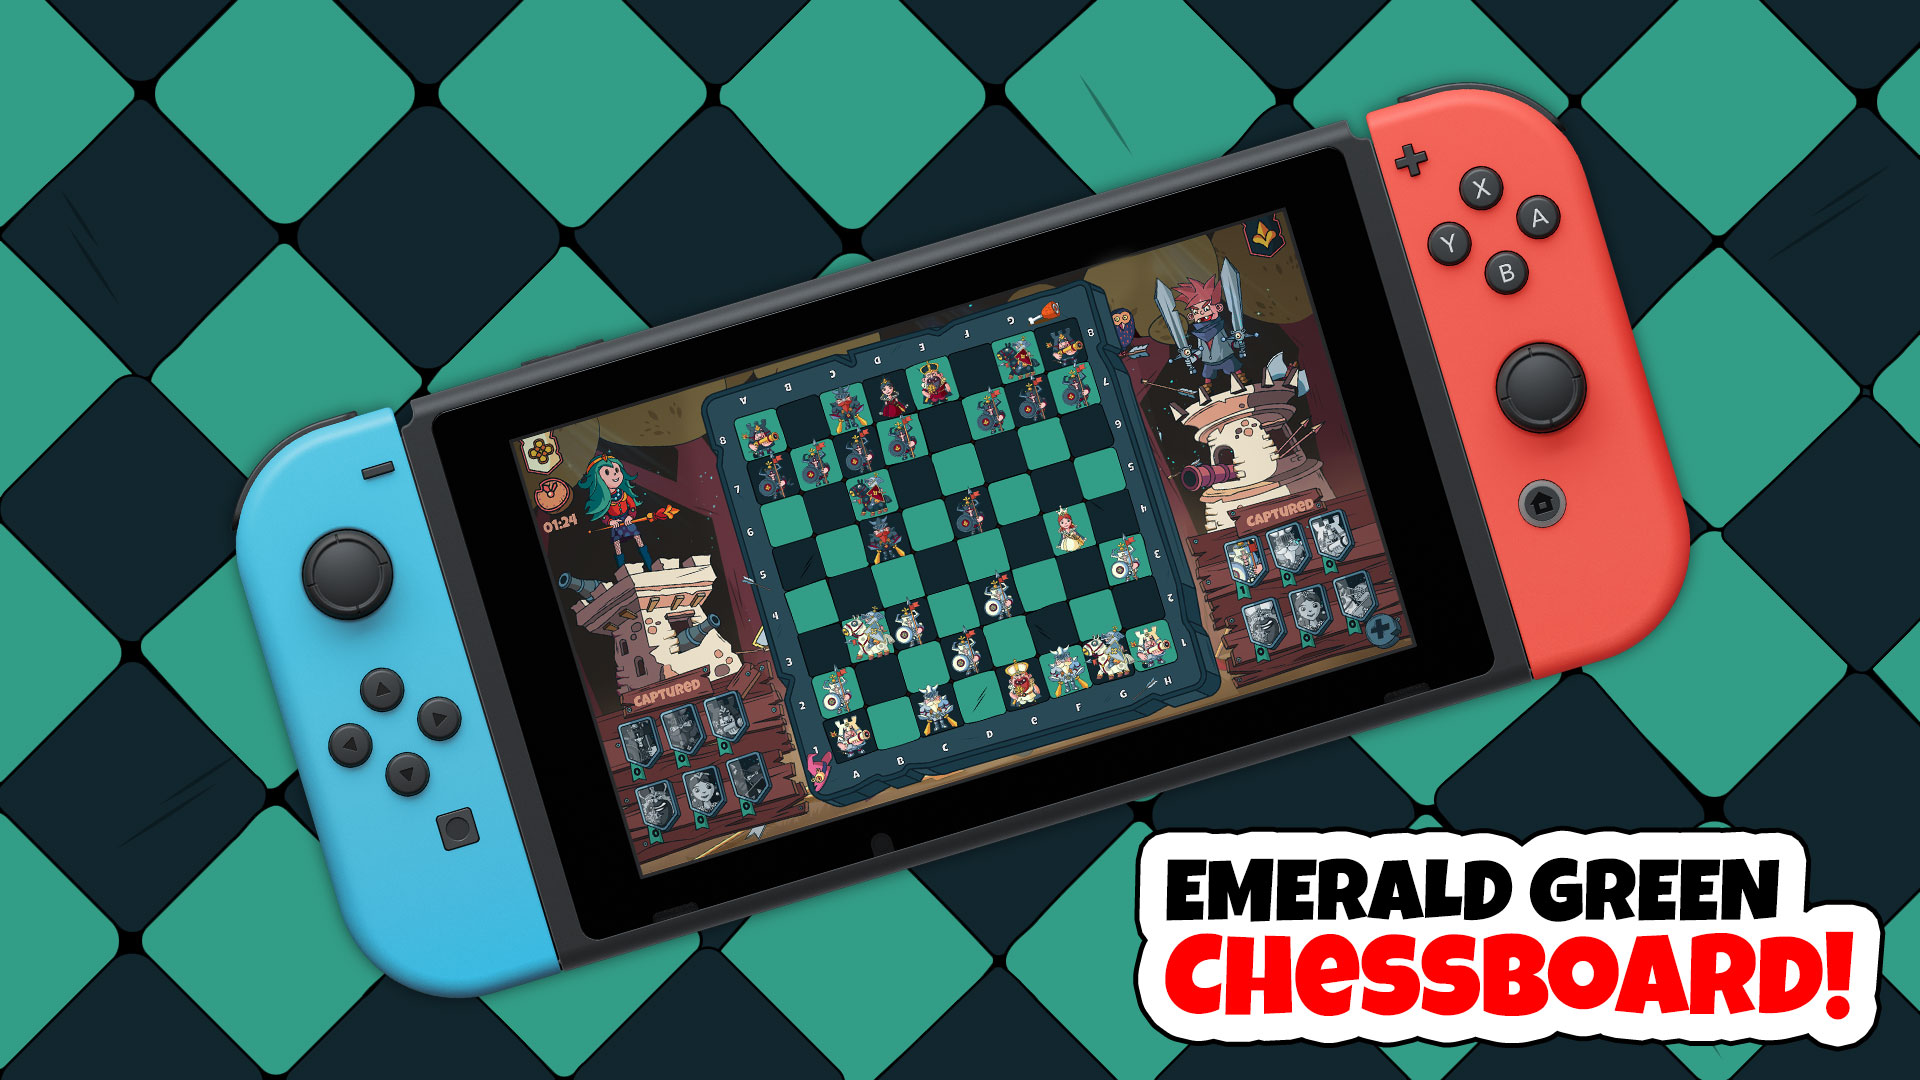 Family Chess Ultimate Edition for Nintendo Switch - Nintendo